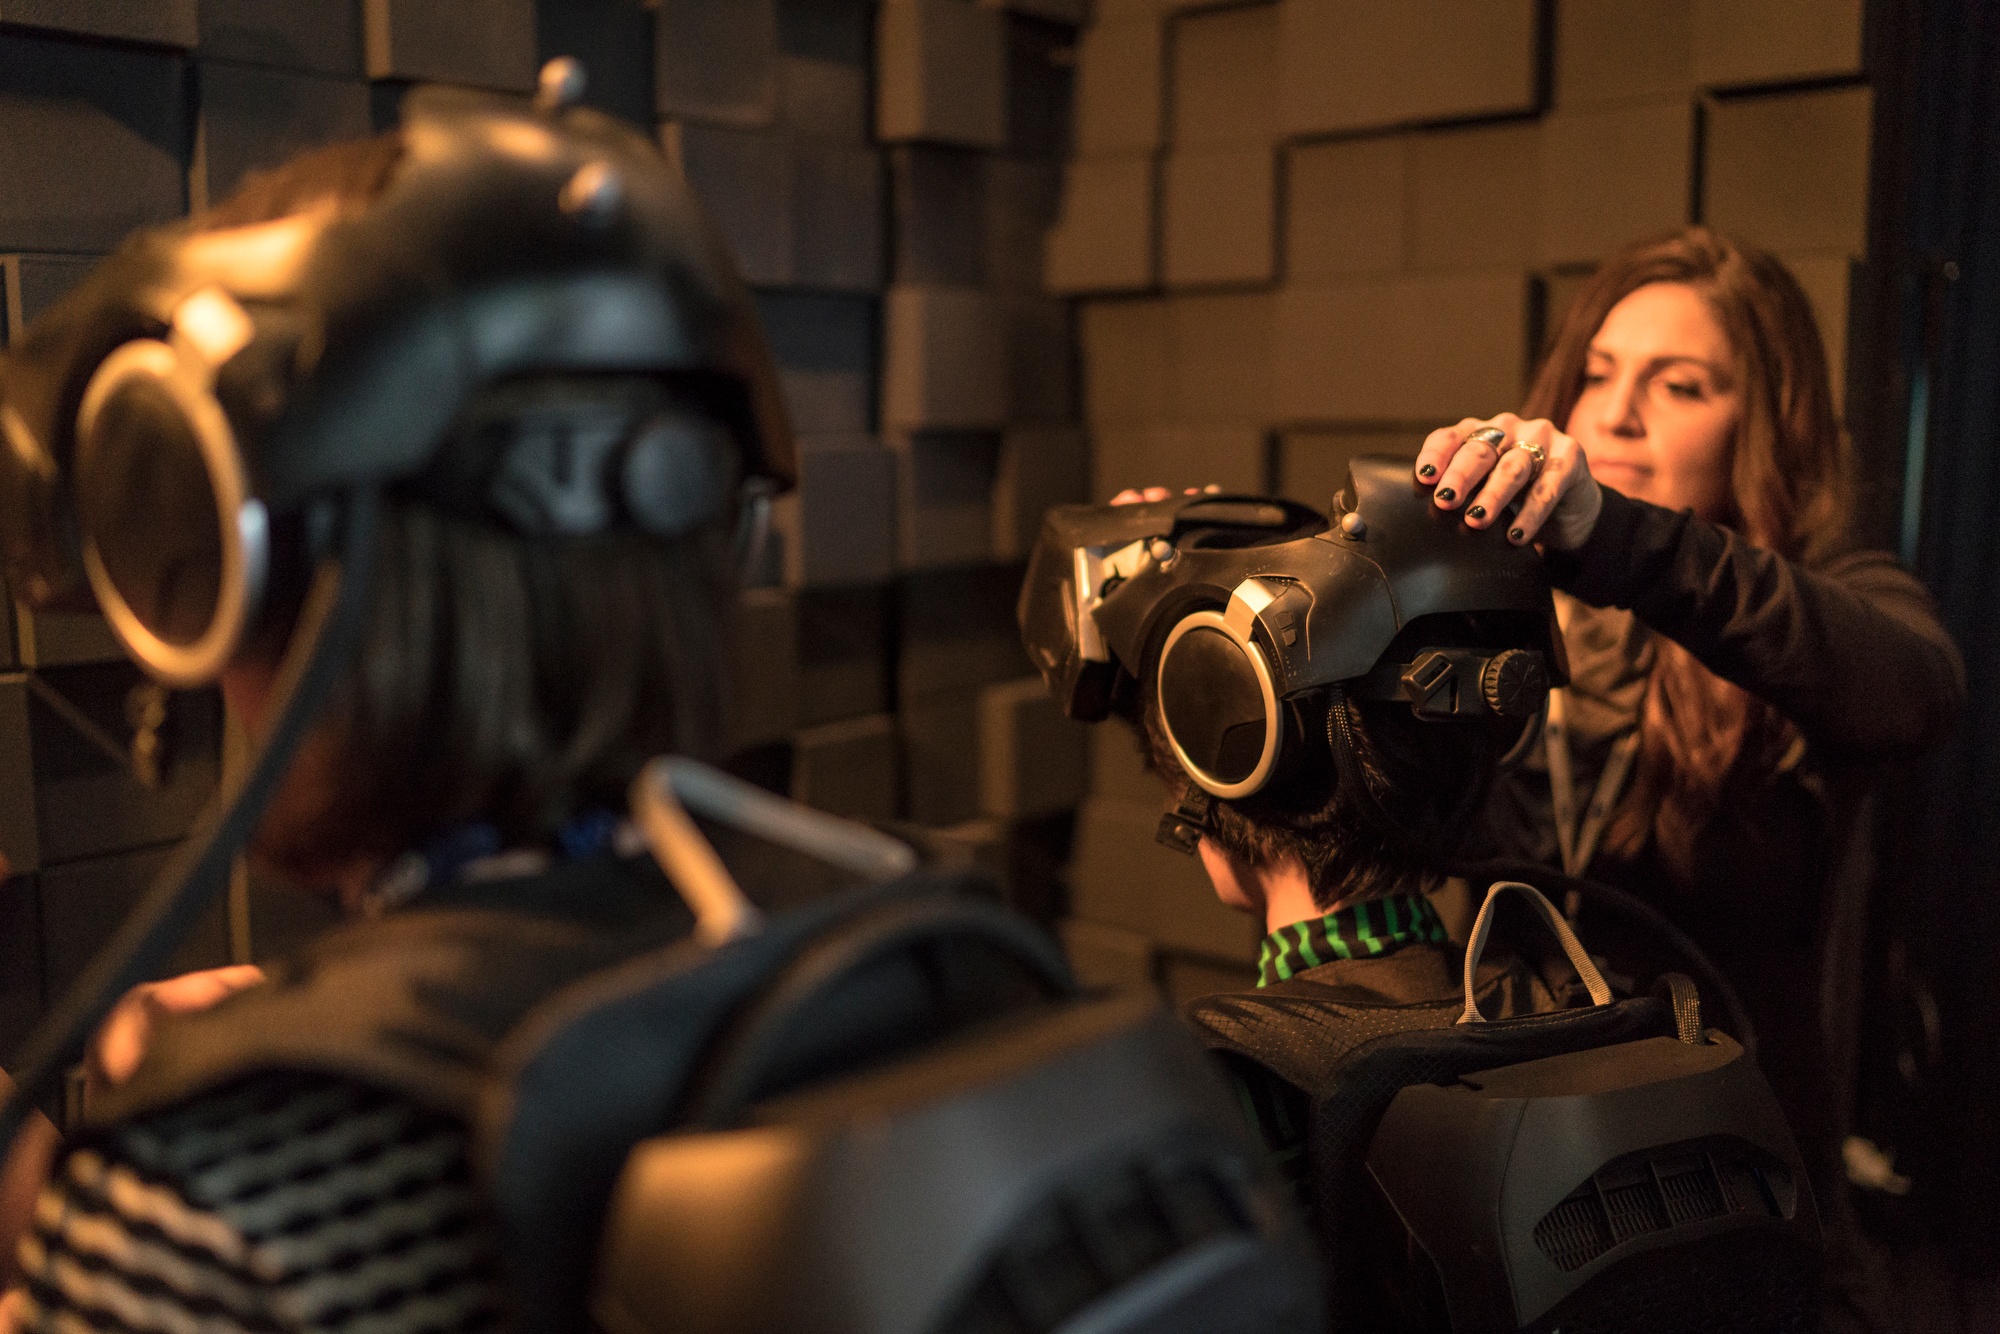 The writer gets fitted with gear for the virtual reality experience, The Void. Photo: Bret Hartman / TED